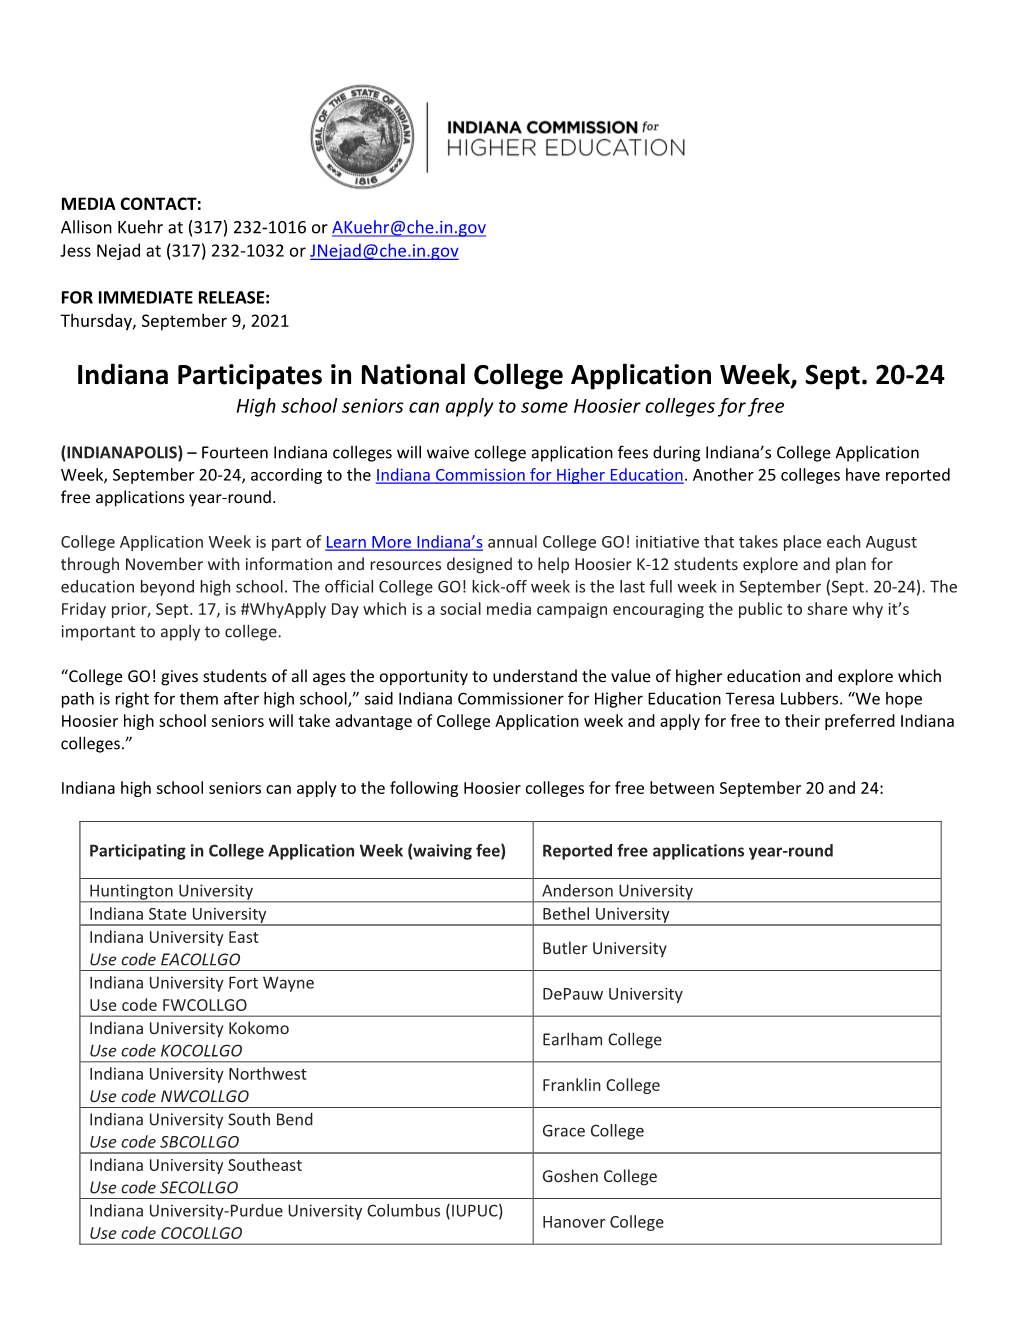 Indiana Participates in National College Application Week, Sept. 20-24 High School Seniors Can Apply to Some Hoosier Colleges for Free